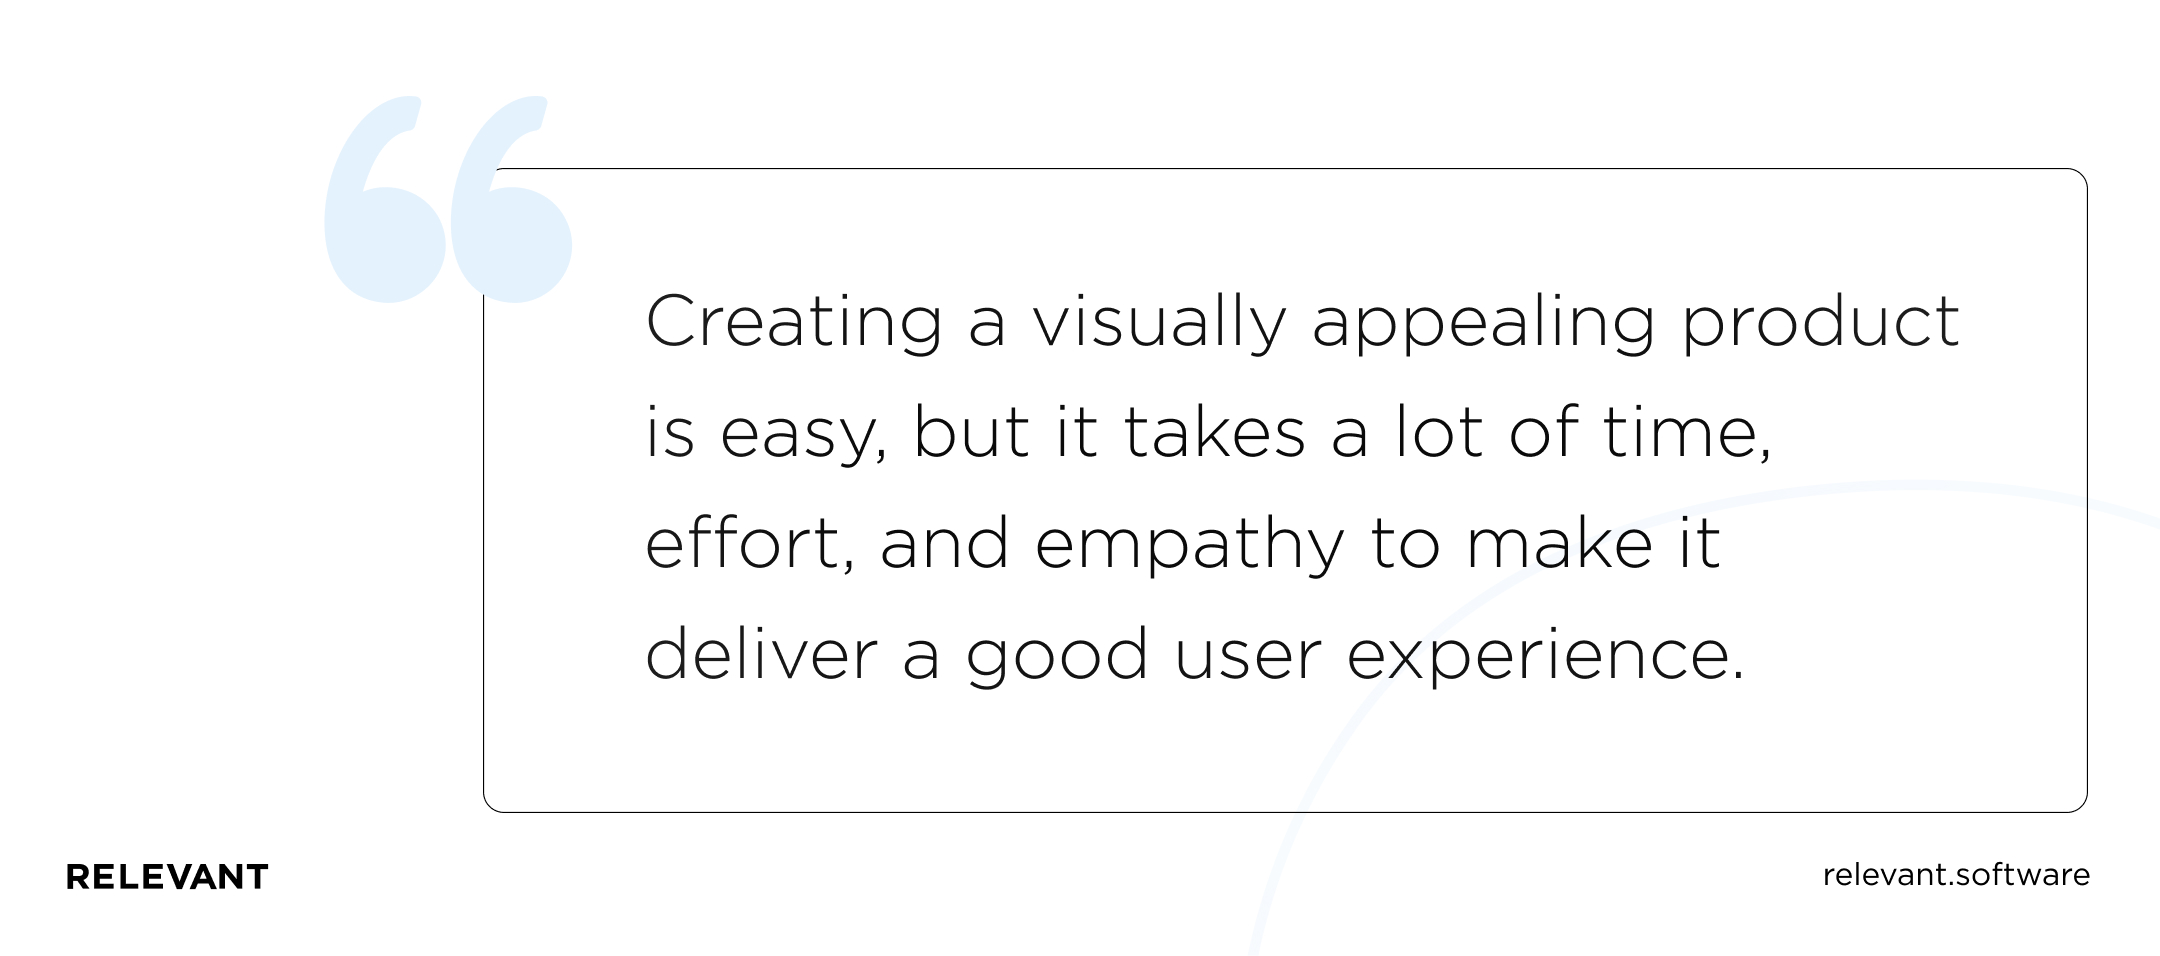 Creating a visually appealing product is easy, but it takes a lot of time, effort, and empathy to make it deliver a good user experience.